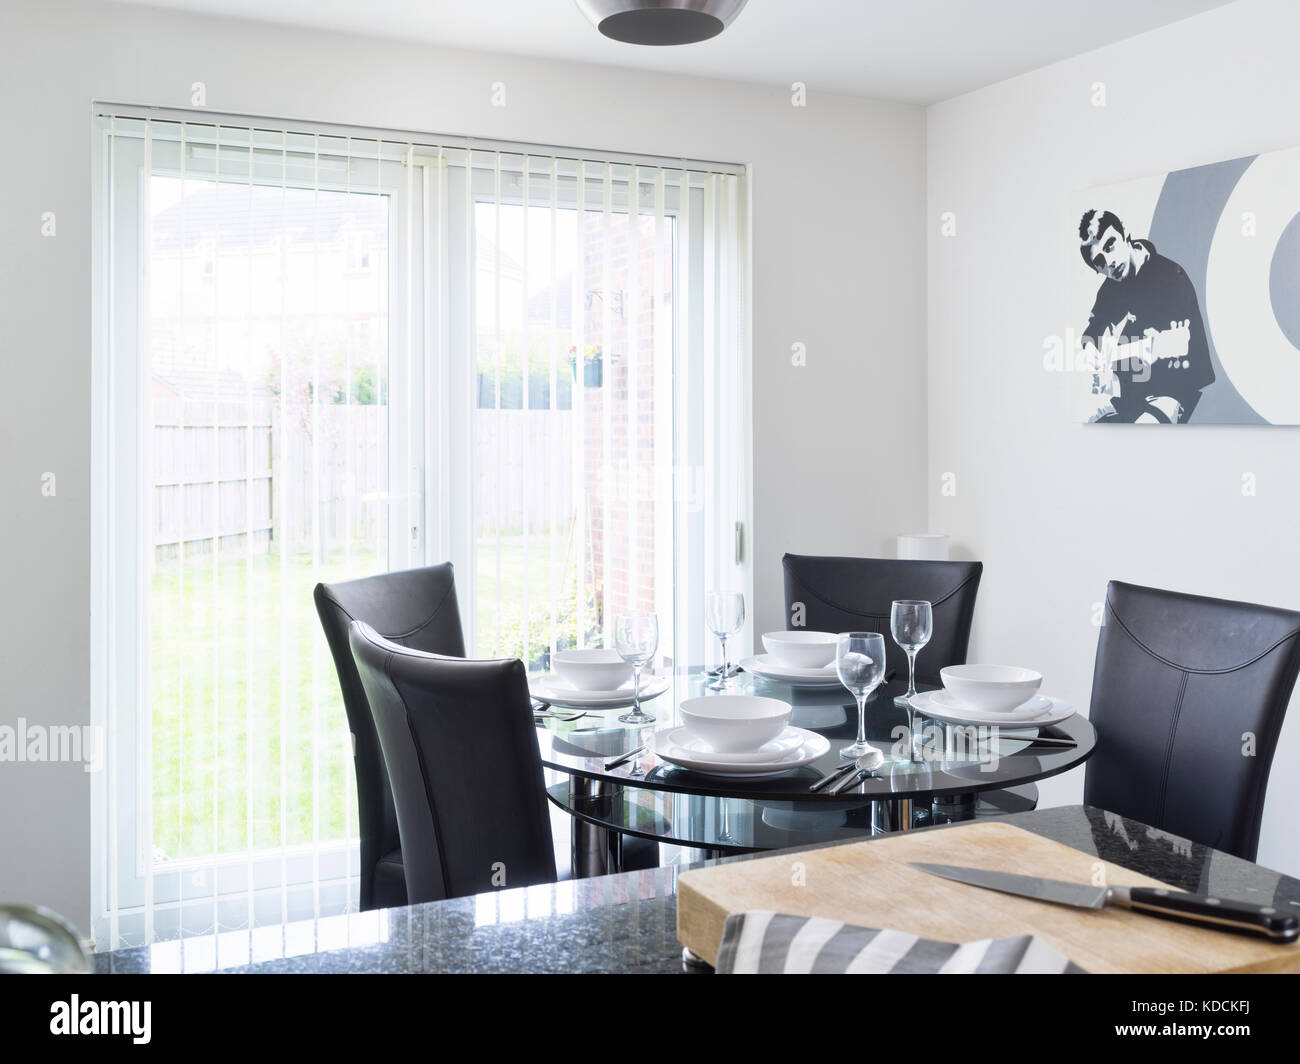 A round glass table with chairs, dressed for a meal in a modern monochrome designed kitchen diner of a contemporary UK home. Stock Photo